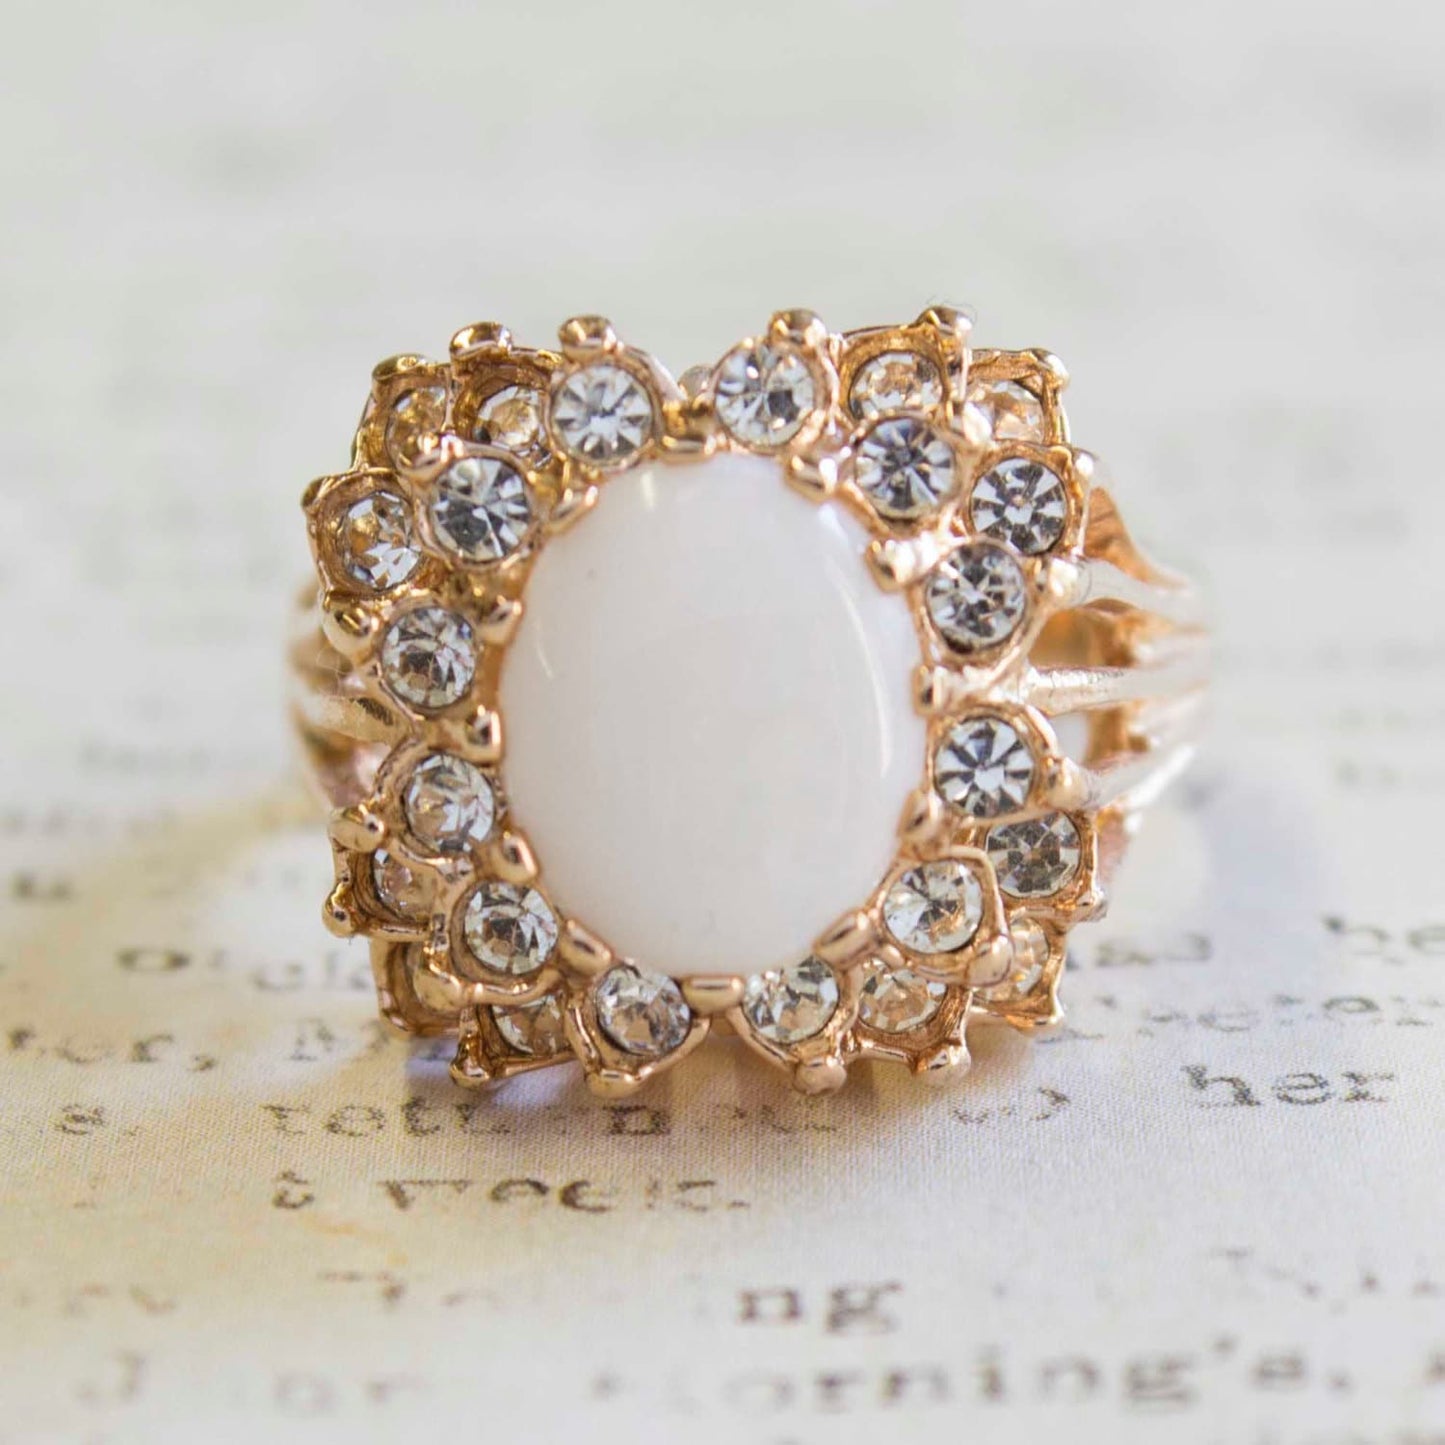 Vintage Ring Genuine Opal and Clear Swarovski Crystals 18k Gold Victorian Style Cocktail Ring #R199 - Limited Stock - Never Worn